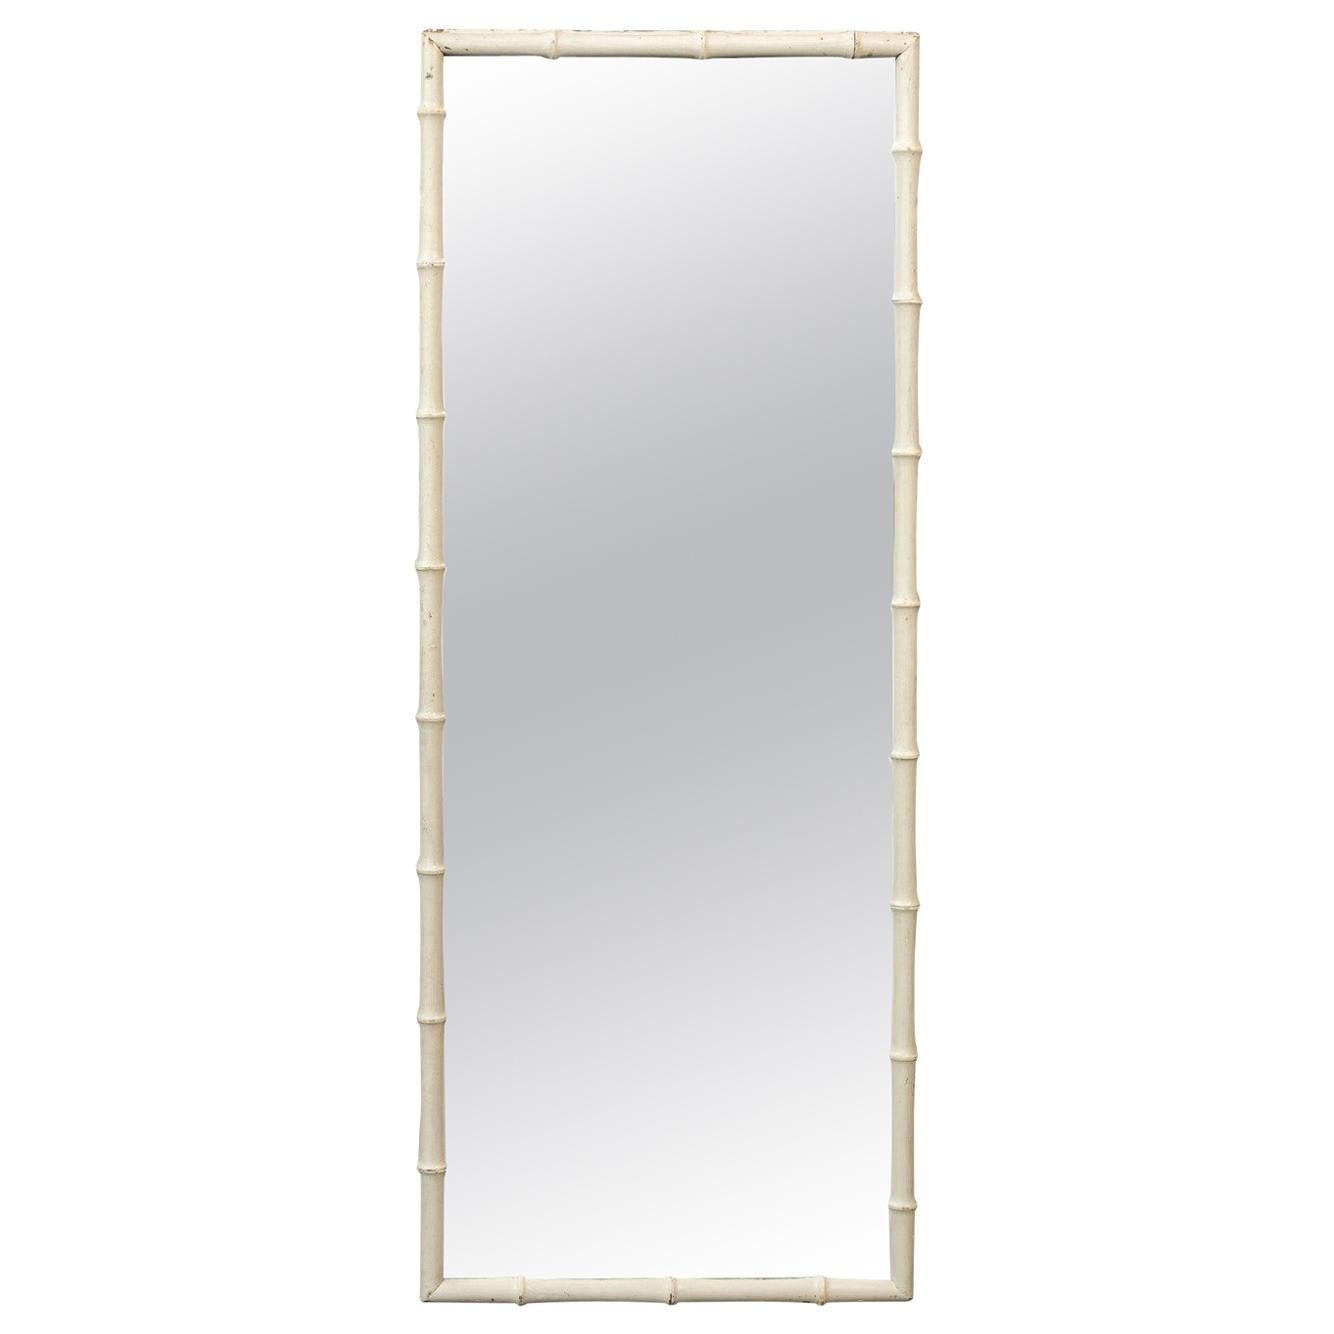 French Turn of the Century Painted Faux Bamboo Rectangular Mirror, circa 1900